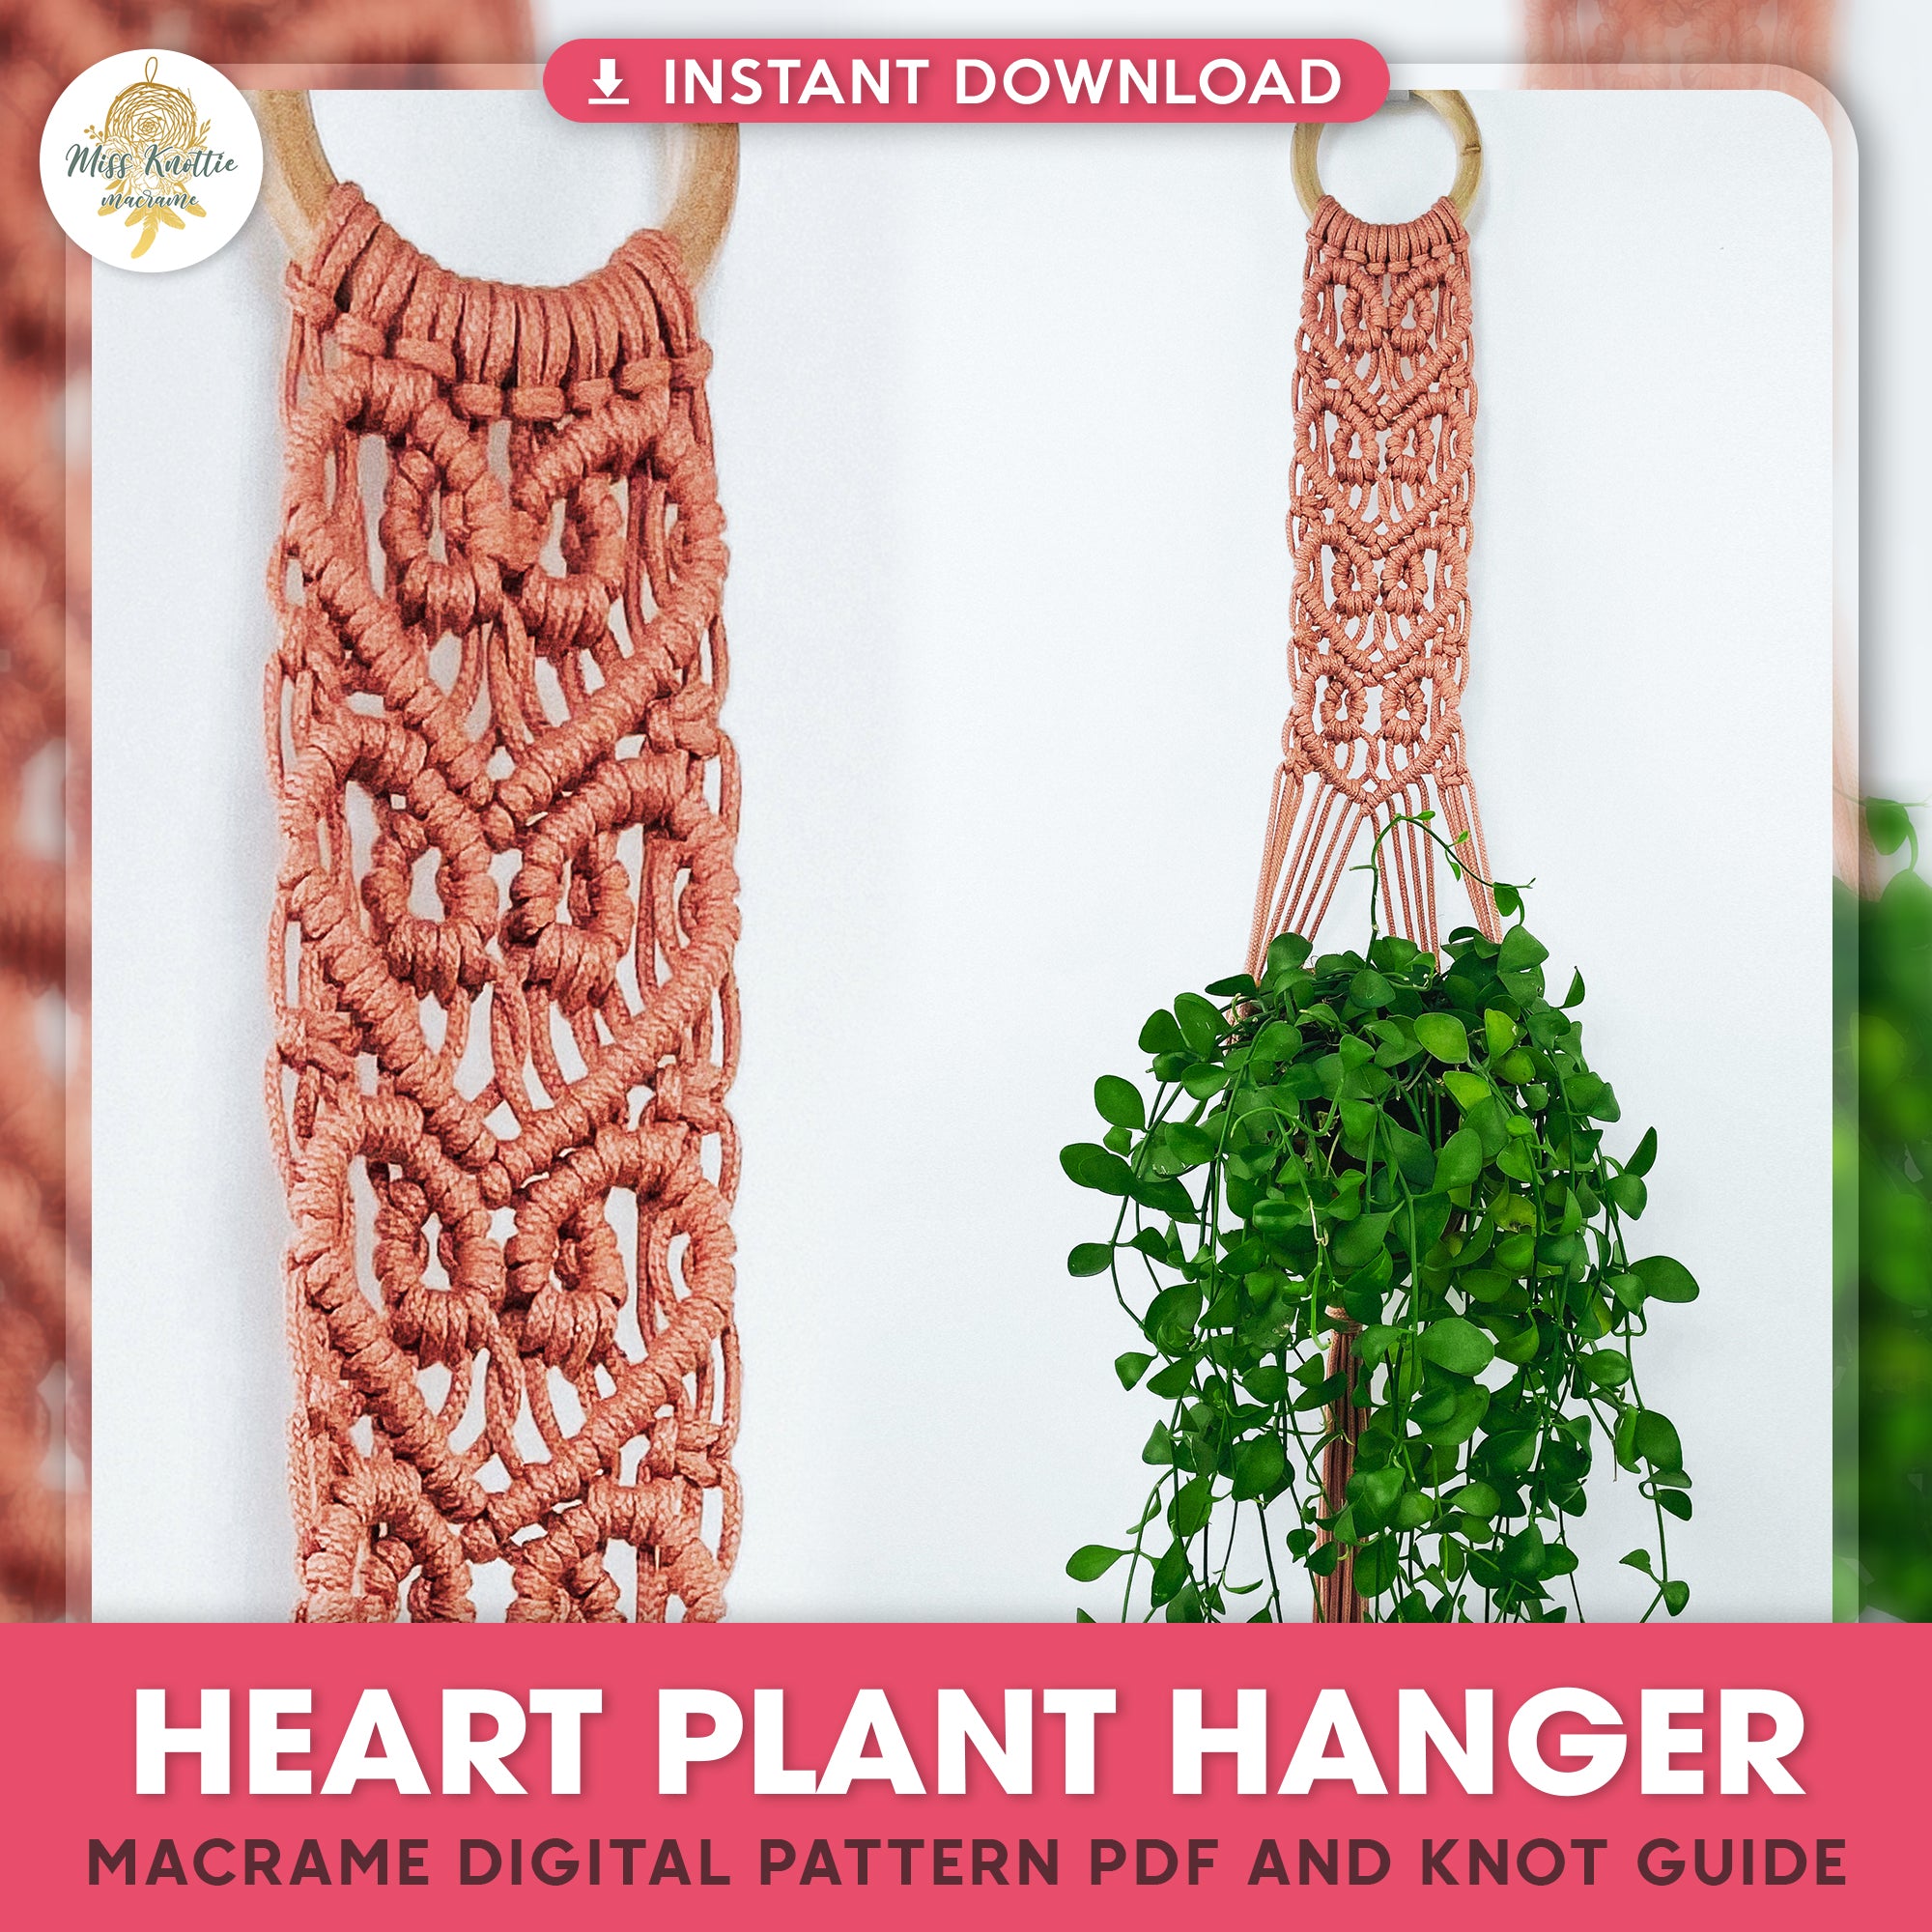 Heart Plant Hanger - Digital PDF and Knot Guide